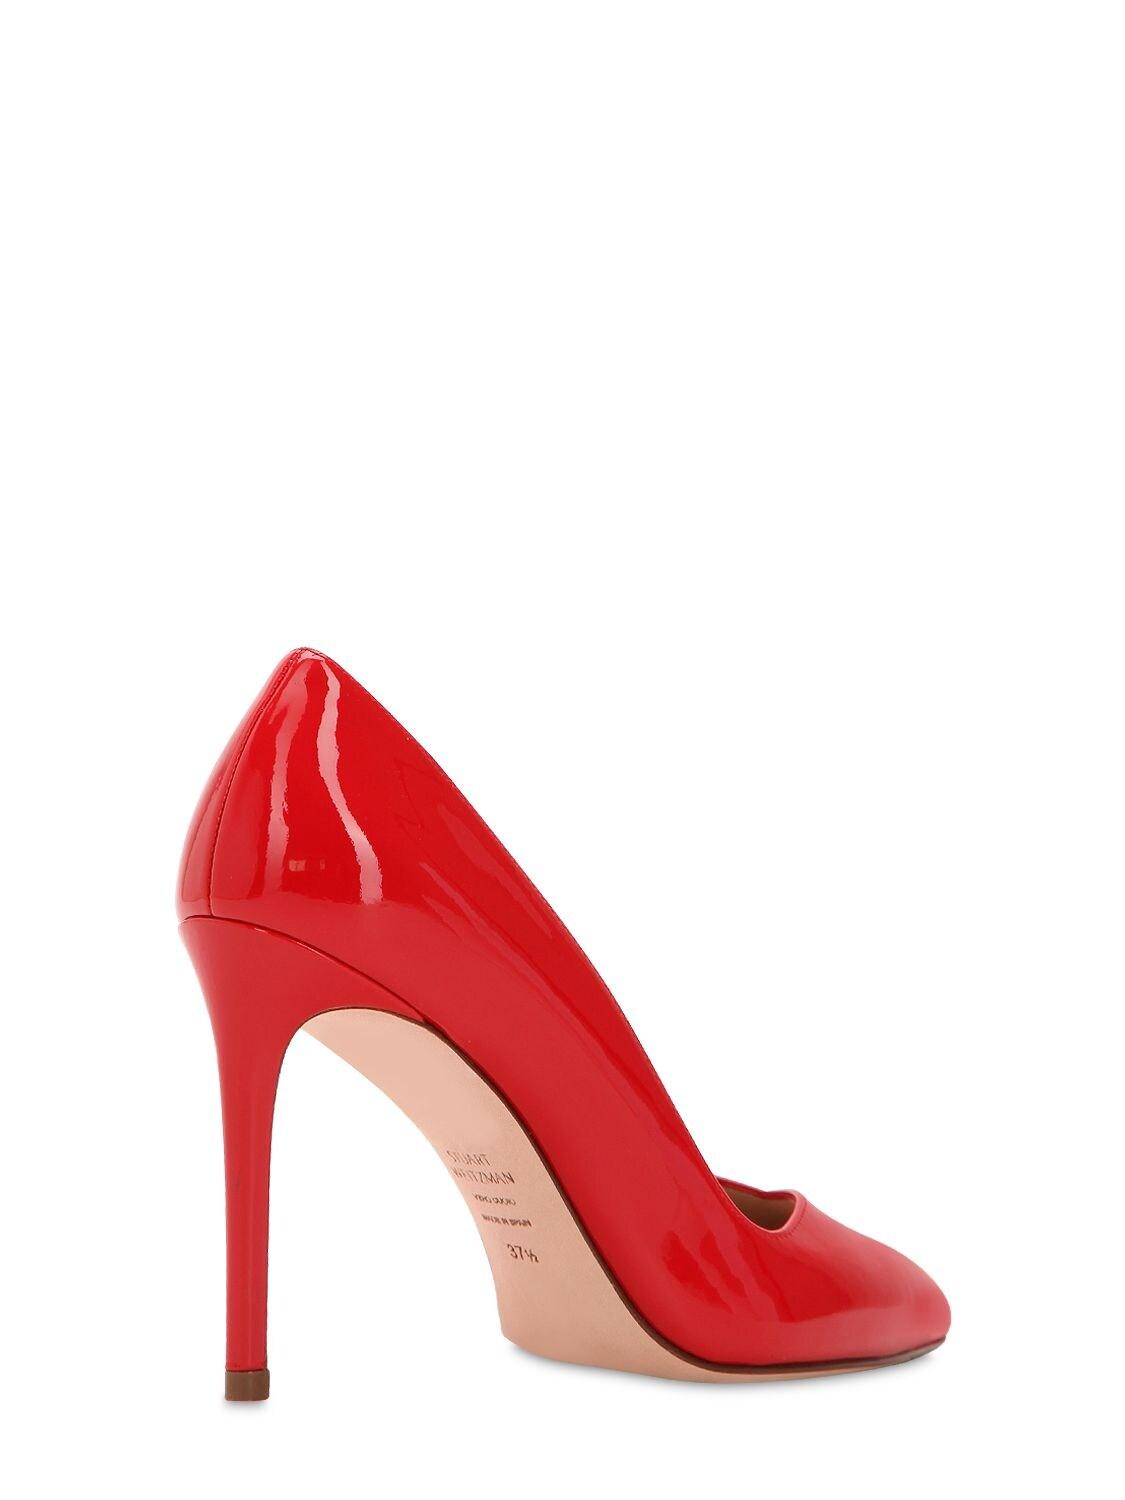 Stuart Weitzman 95mm Anny Patent Leather Pumps in Red - Lyst